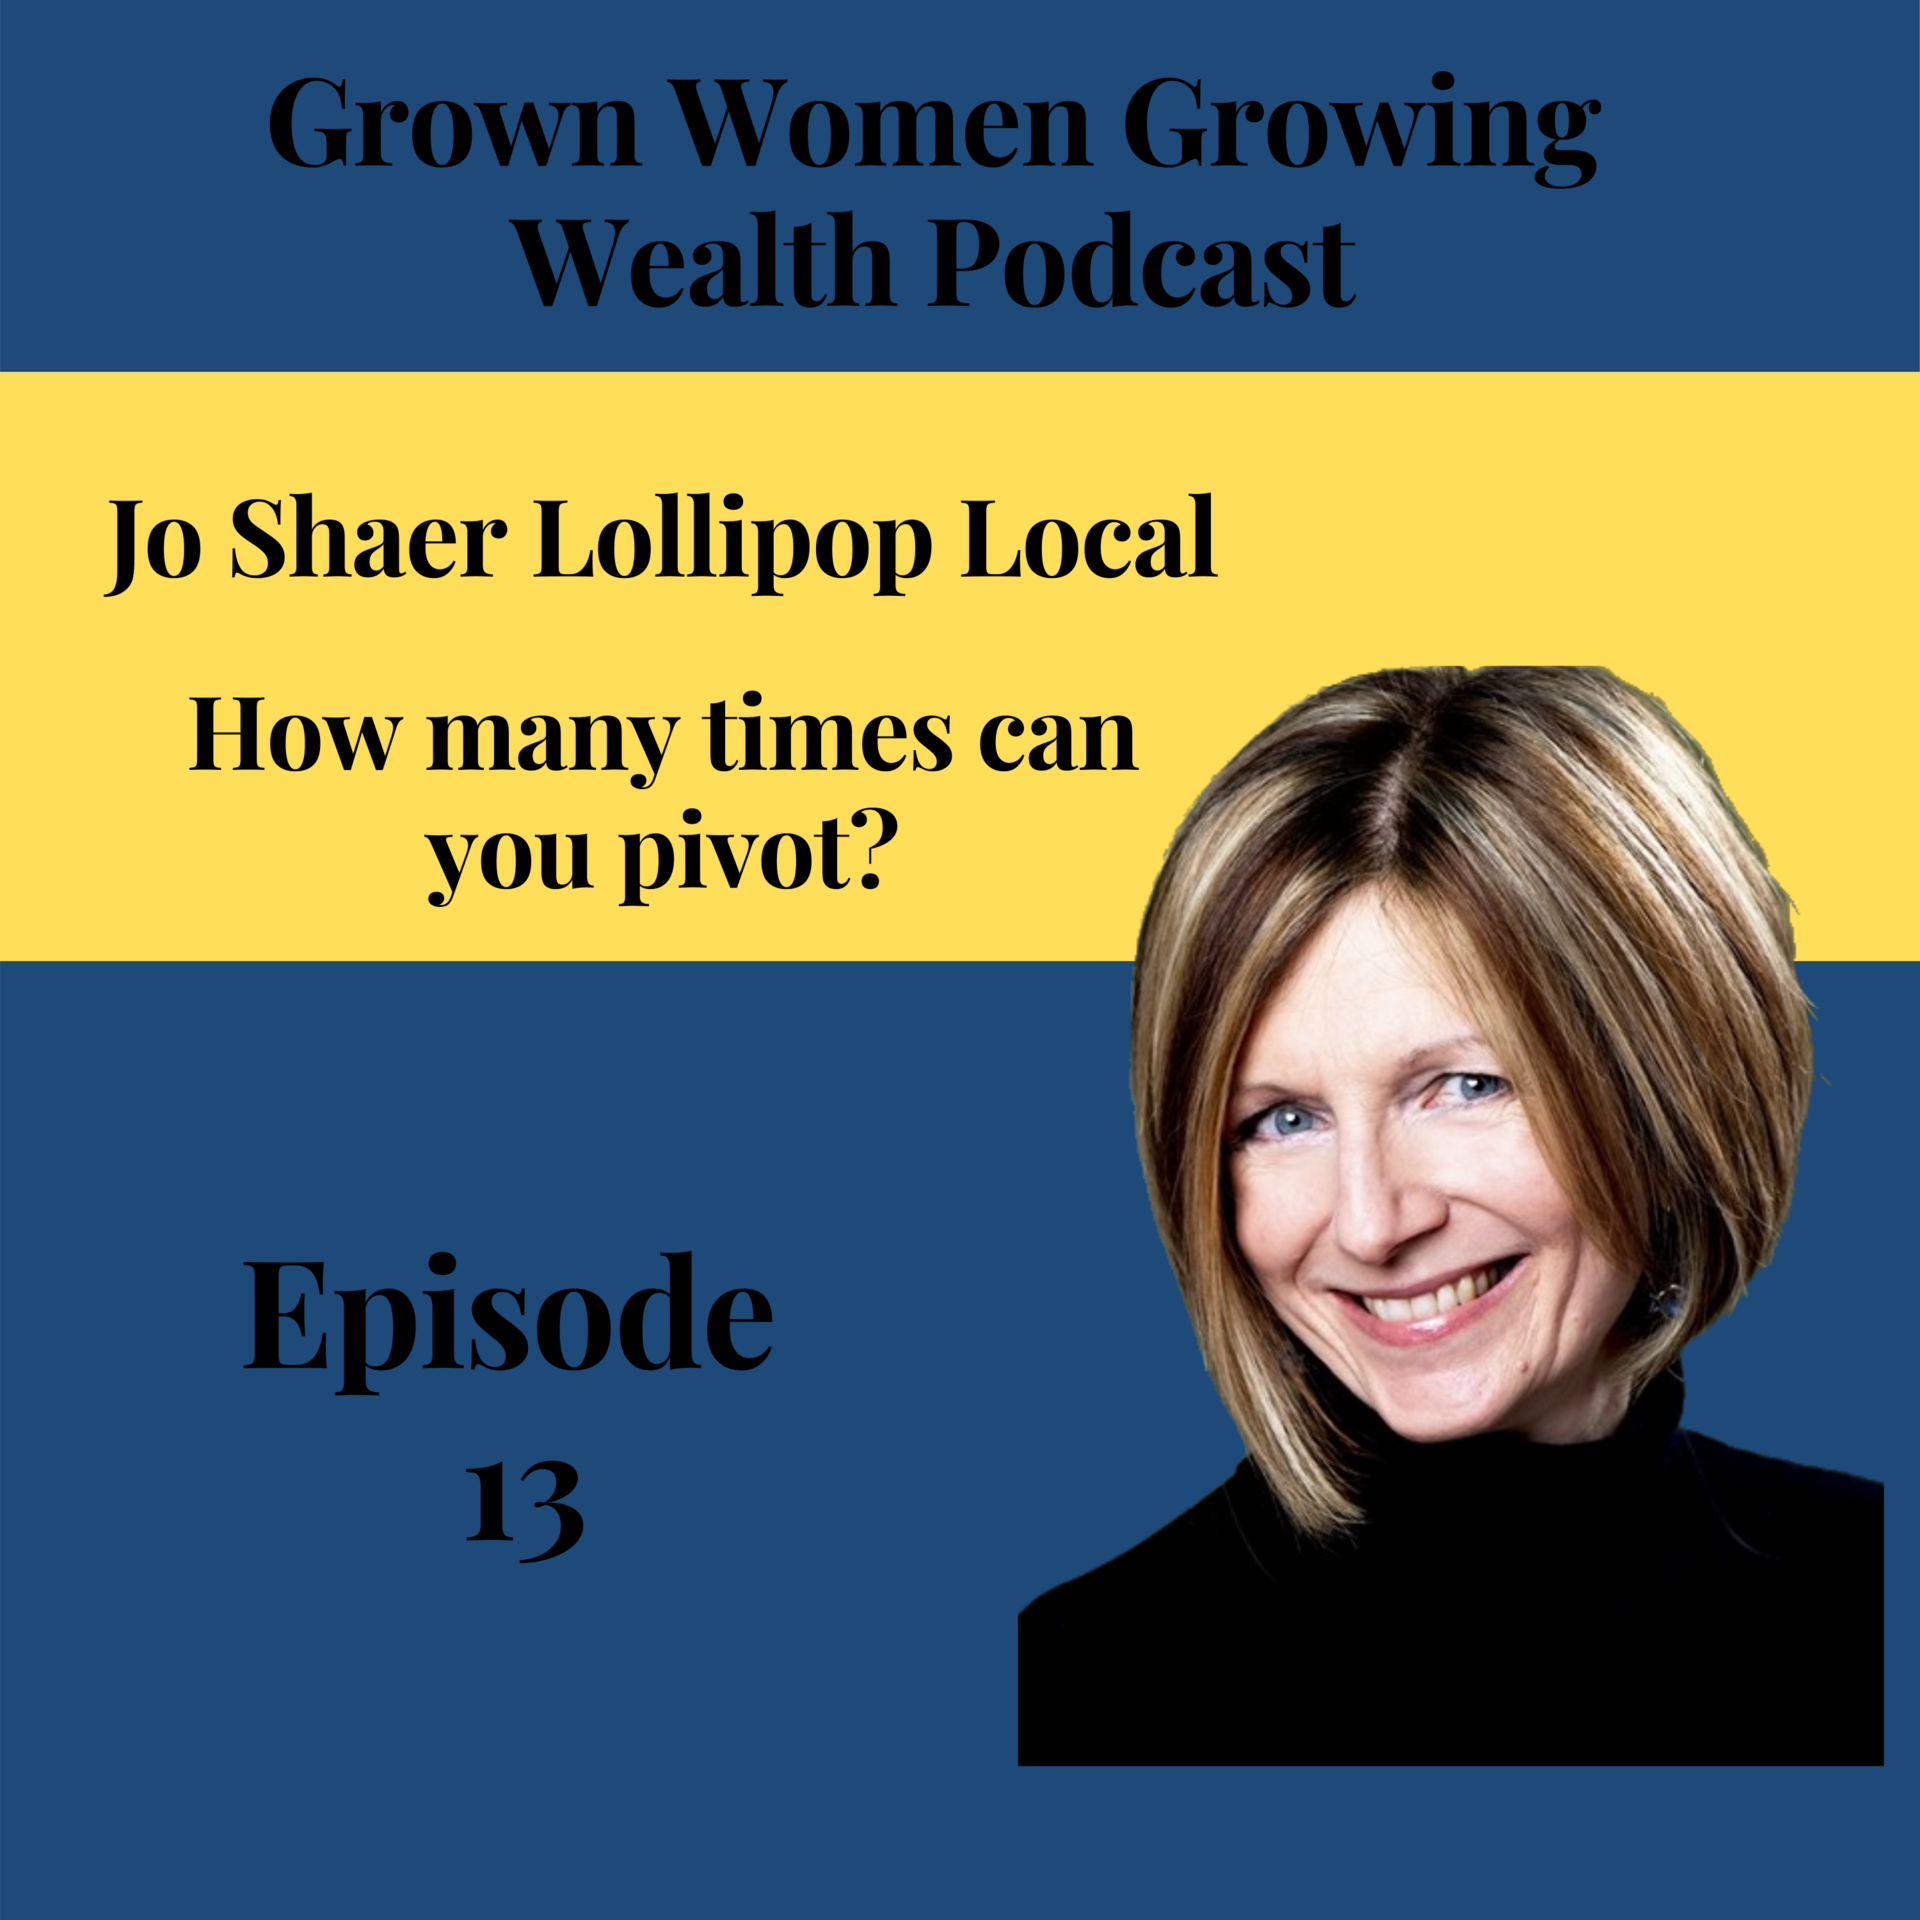 Ep 13: How many times can you pivot? with Jo Shaer Lollipop Local Image